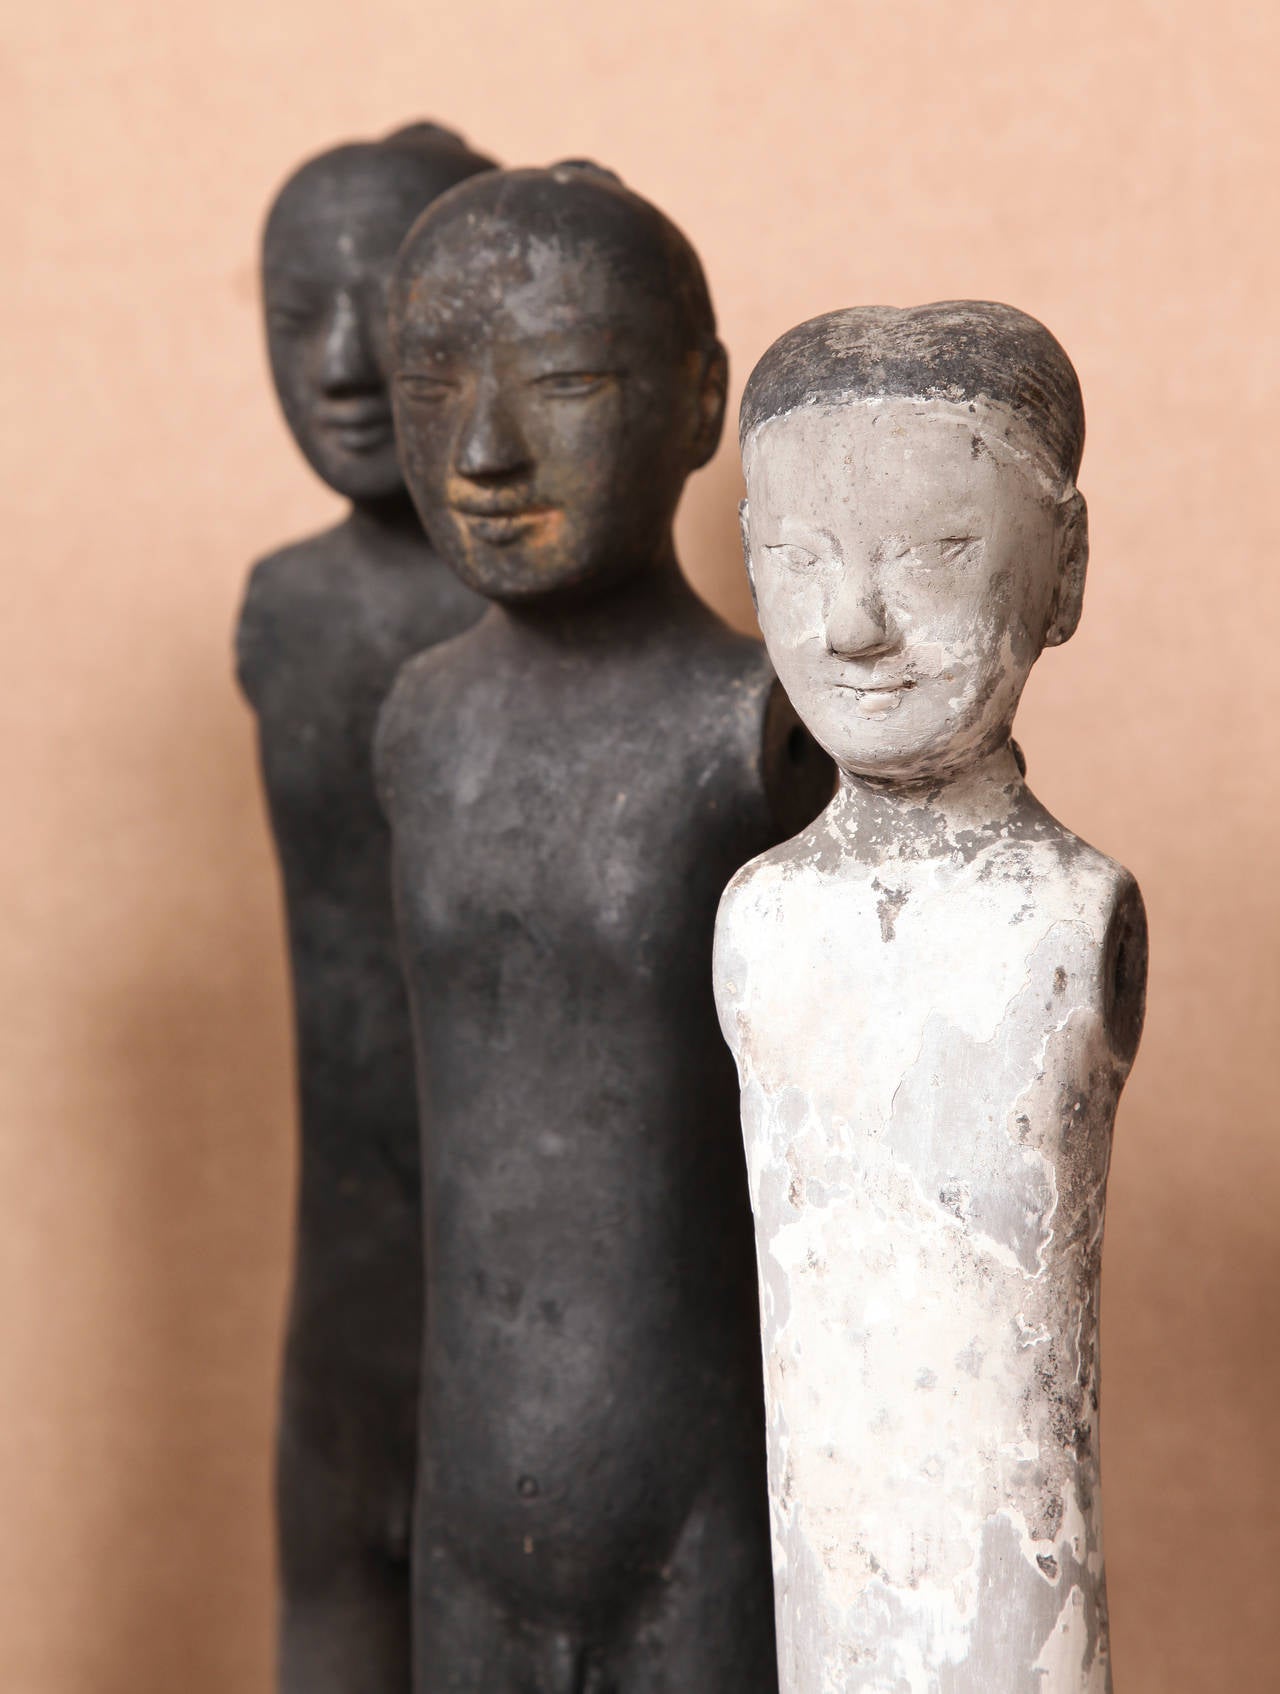 Made from a two part mold, these figures were used in tomb burials beginning in the 2nd century BCE.  These tomb figures are remarkably different from earlier examples as they are portrayed nude. Originally, each figure would have been fitted with a